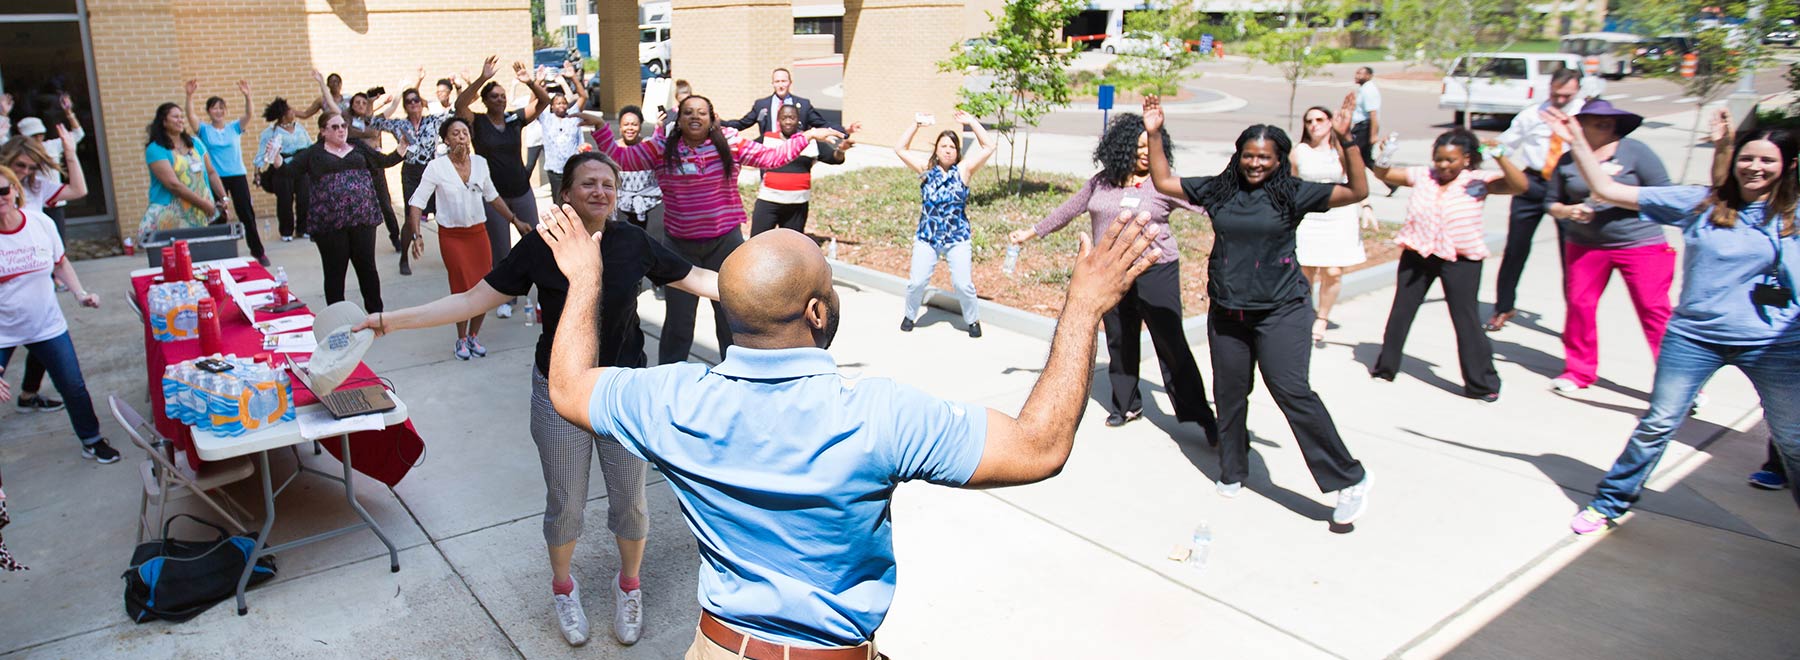 Educator leads a group in outdoor exercise